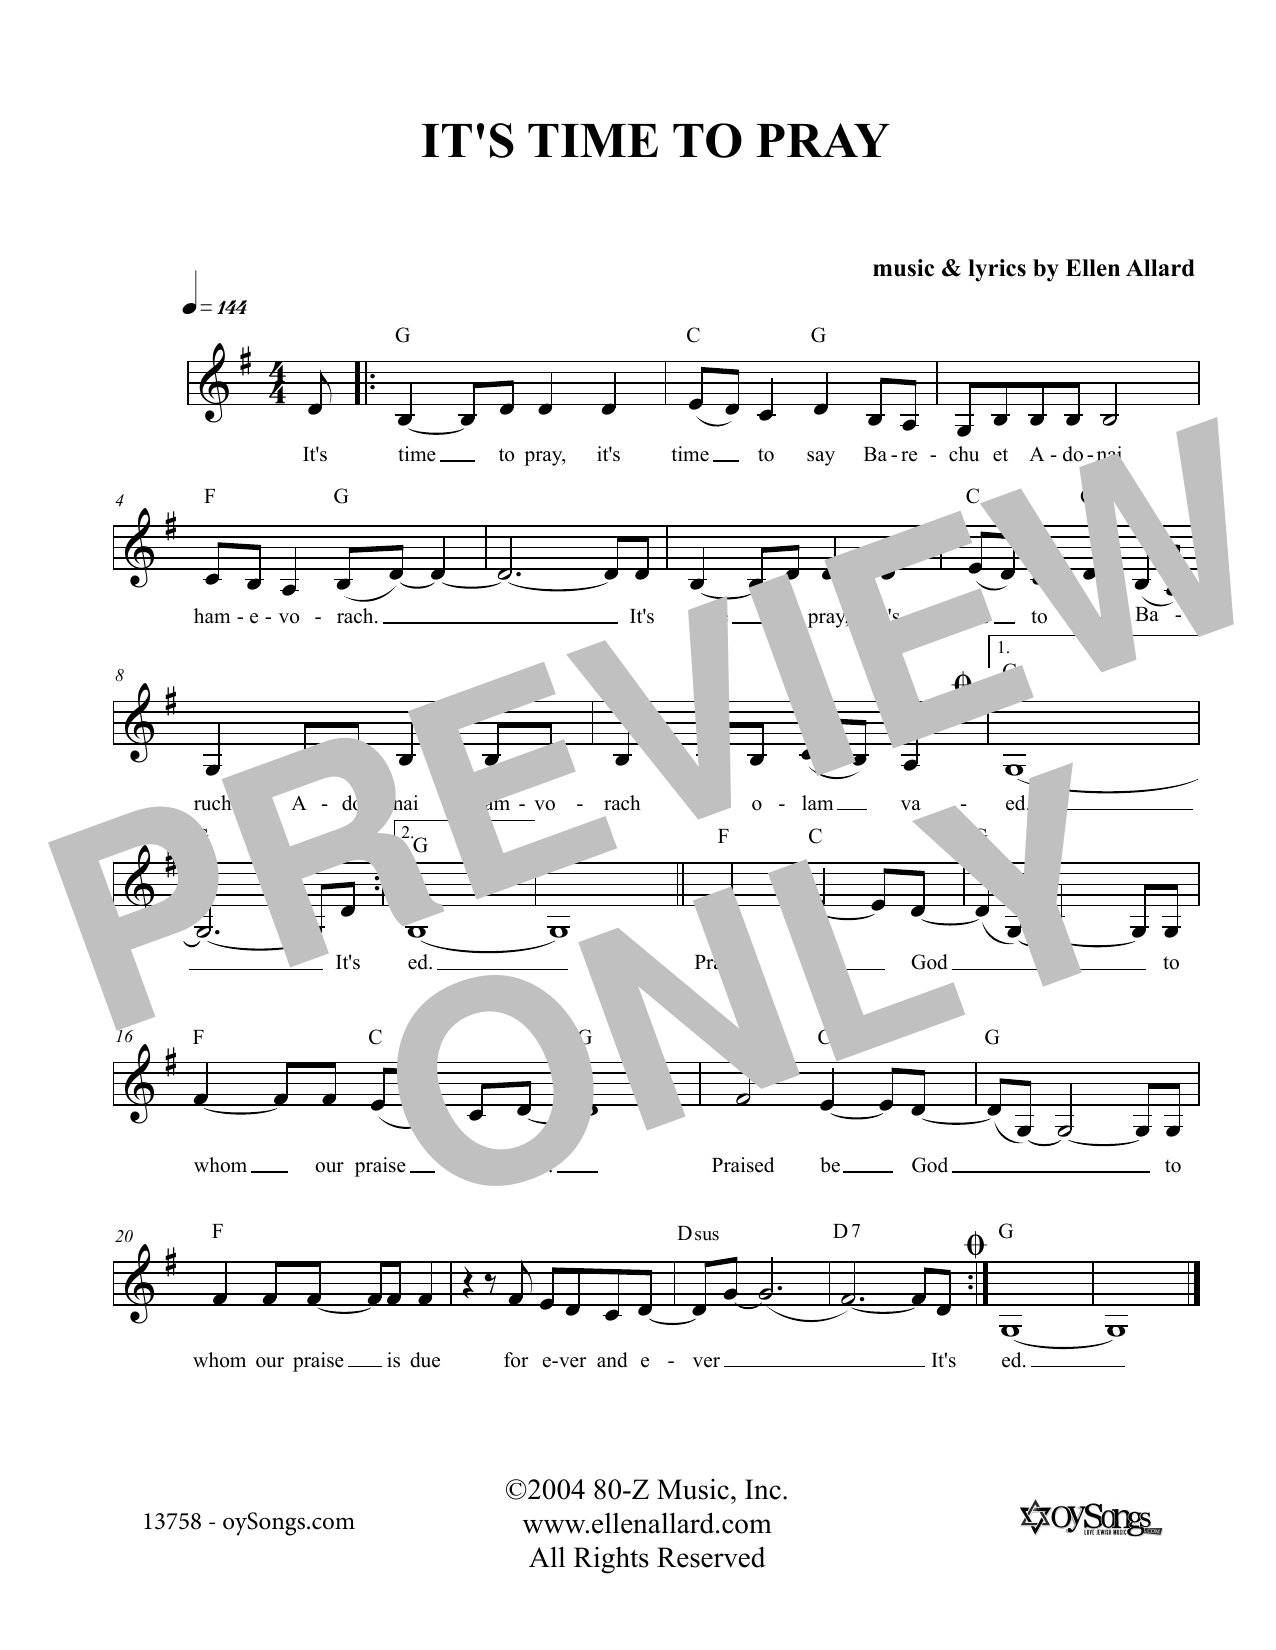 Ellen Allard It's Time To Pray sheet music notes and chords. Download Printable PDF.